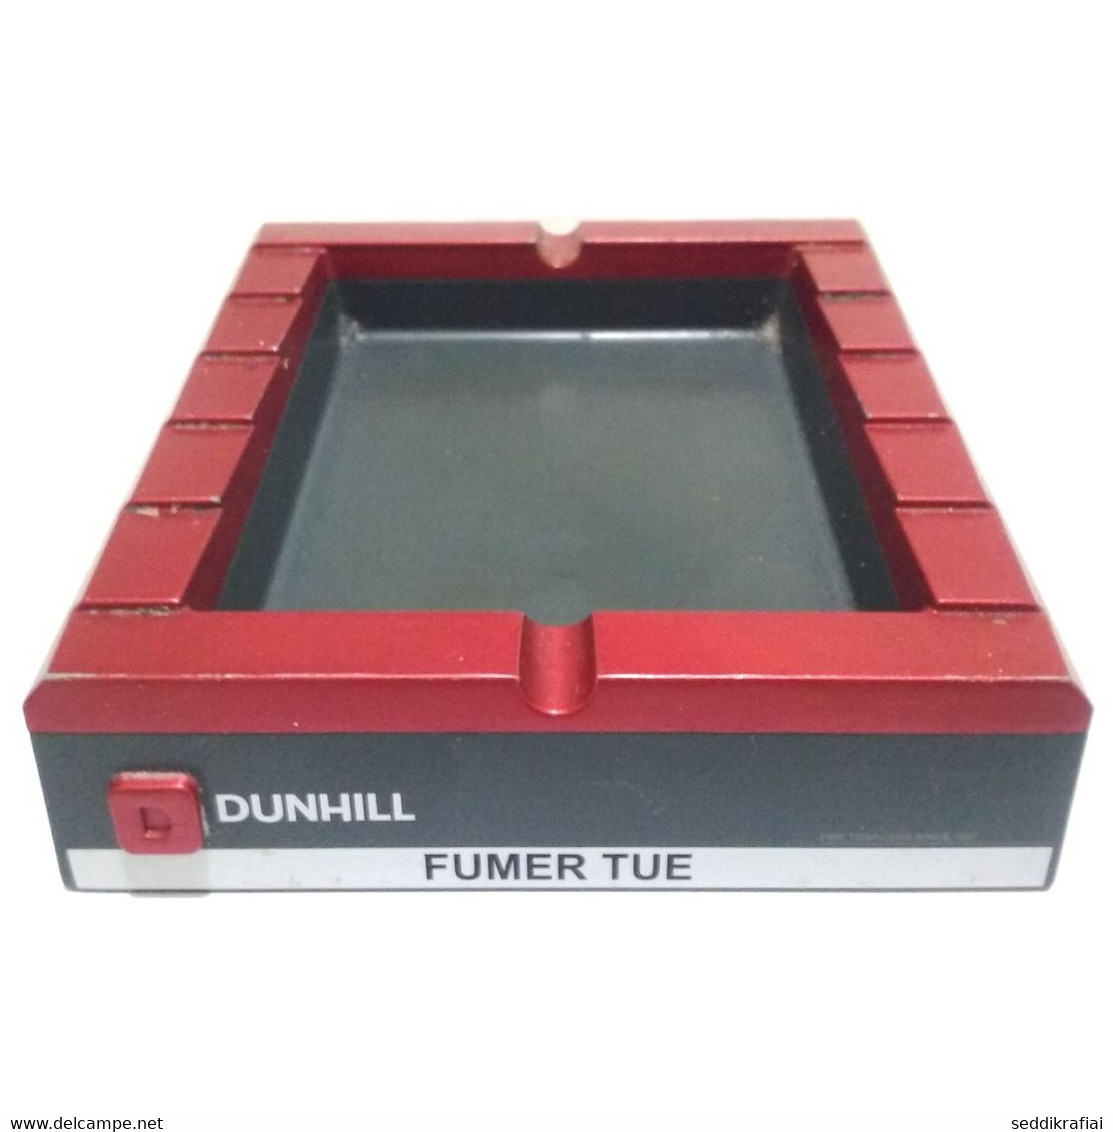 Ashtray Dunhill Tobacco Cigar Alfred Dunhill Fin Tabaccos Since 1907s Cigarettes - Metall